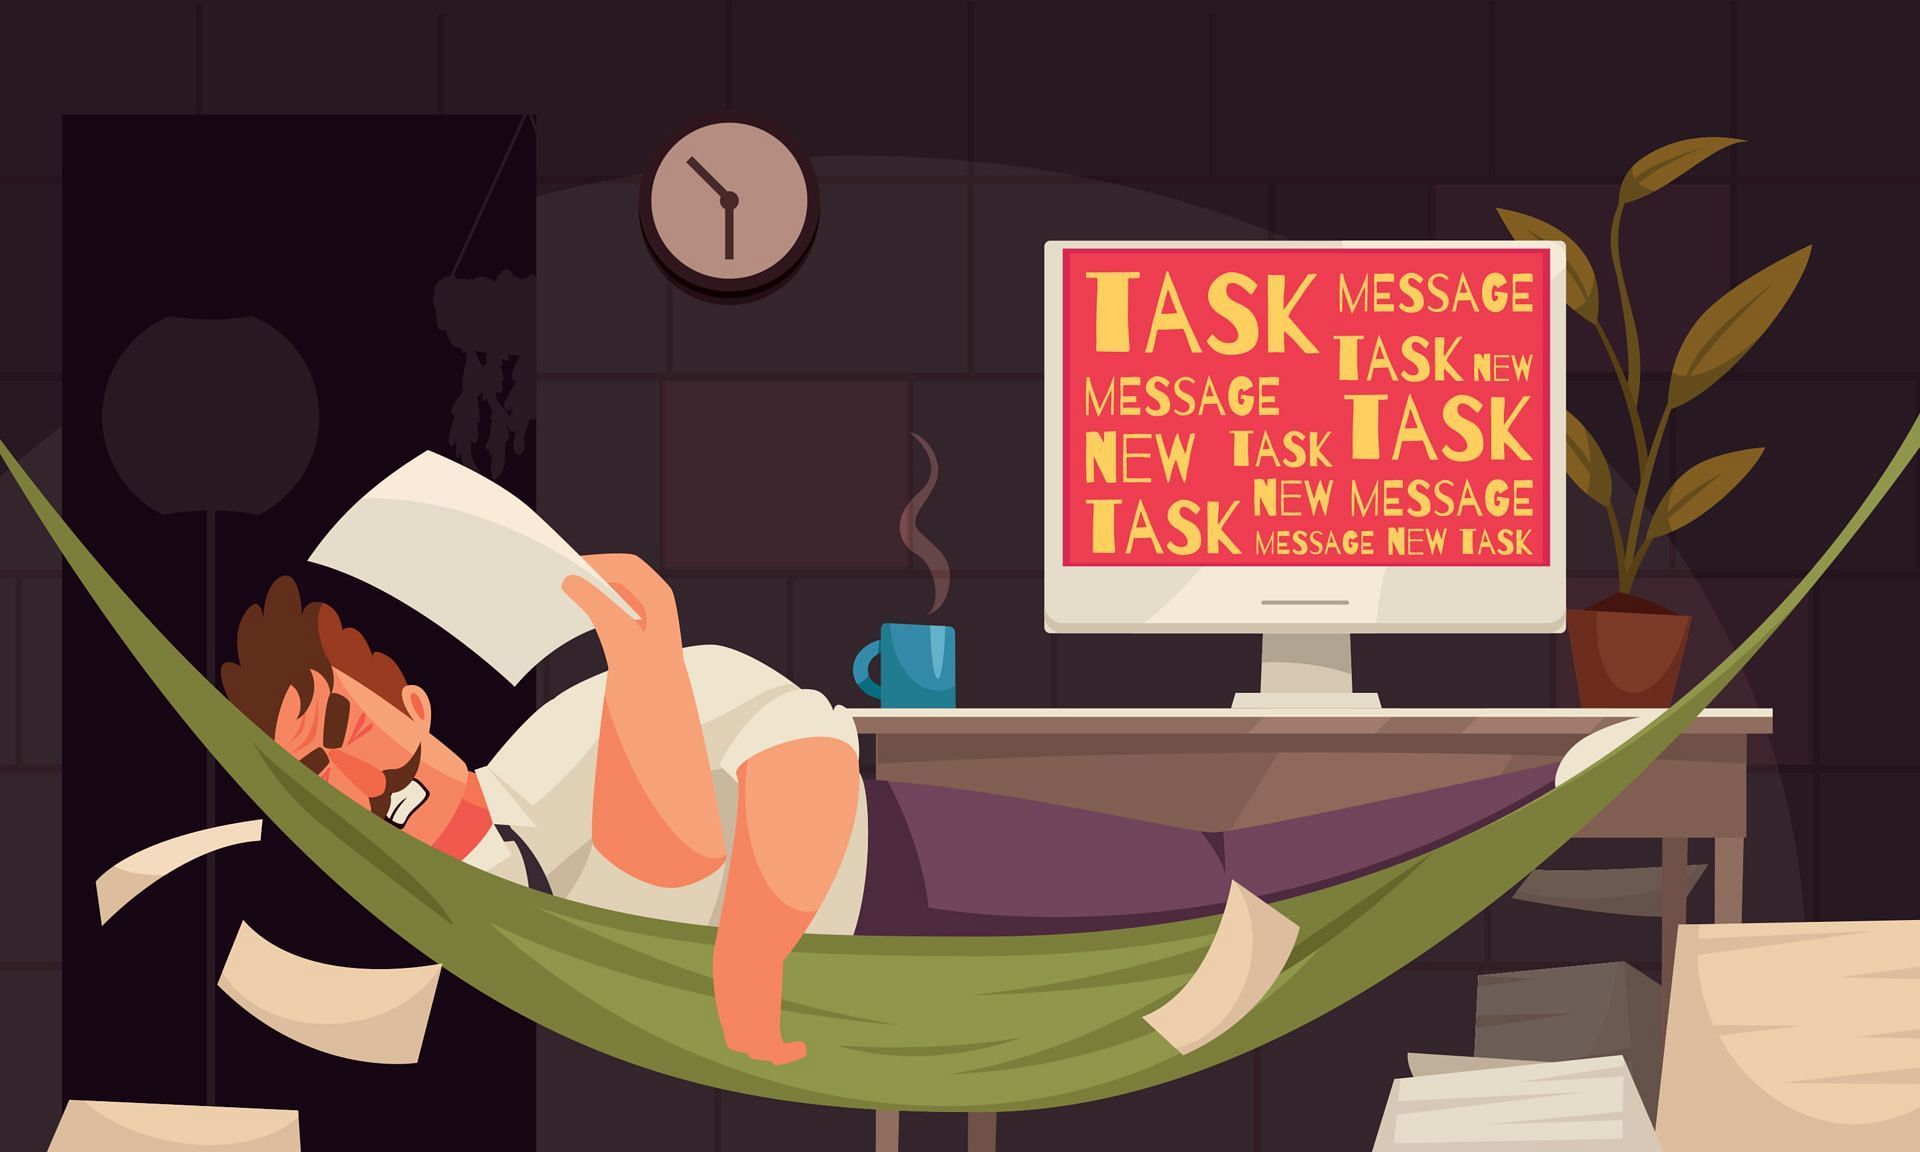 These reasons often form the roots for not finishing tasks on time. (Image via Vecteezy/ Vecteezy)